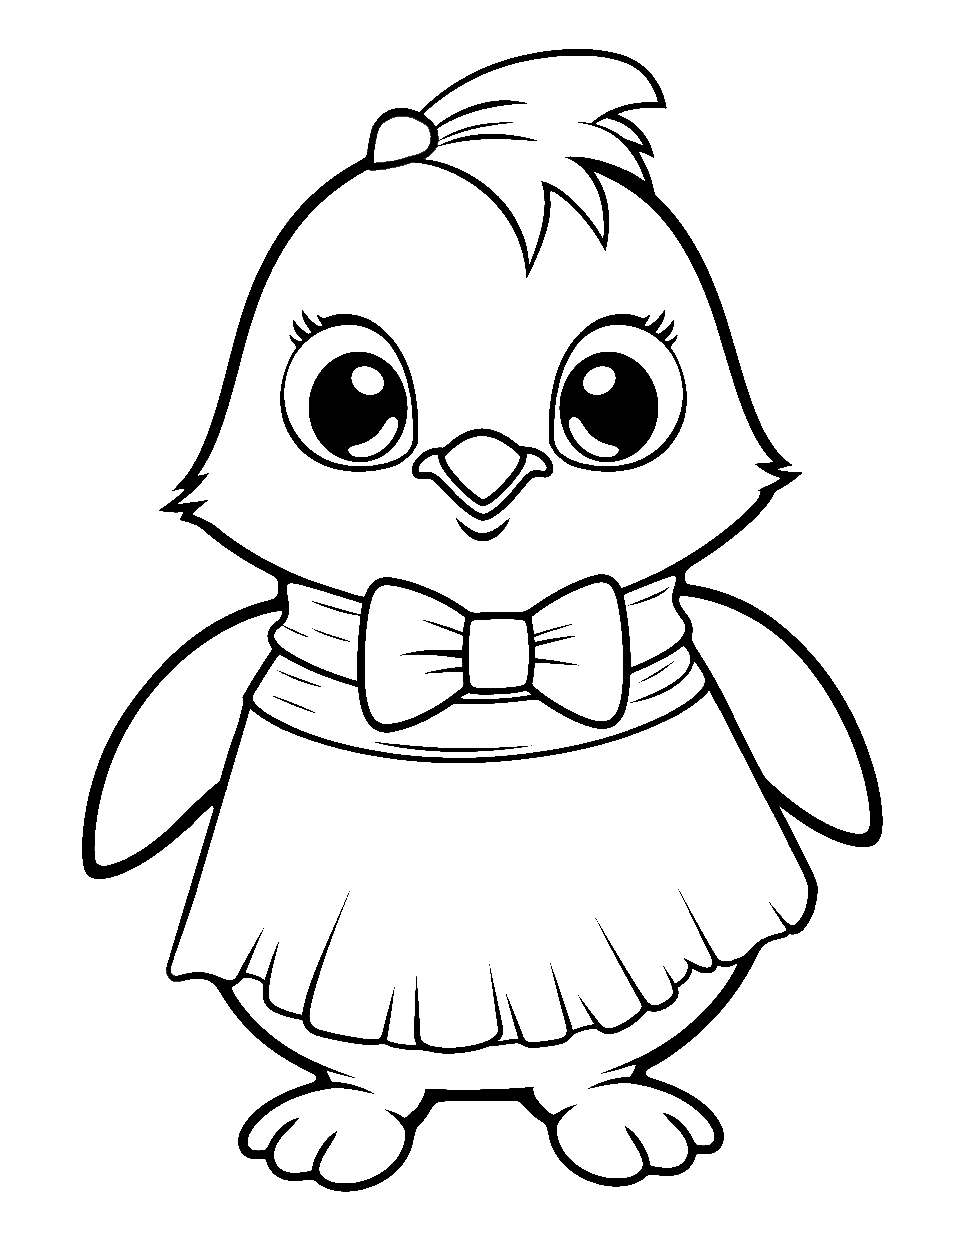 Girl Penguin in Dress Coloring Page - A female penguin wearing a cute skirt and bow.